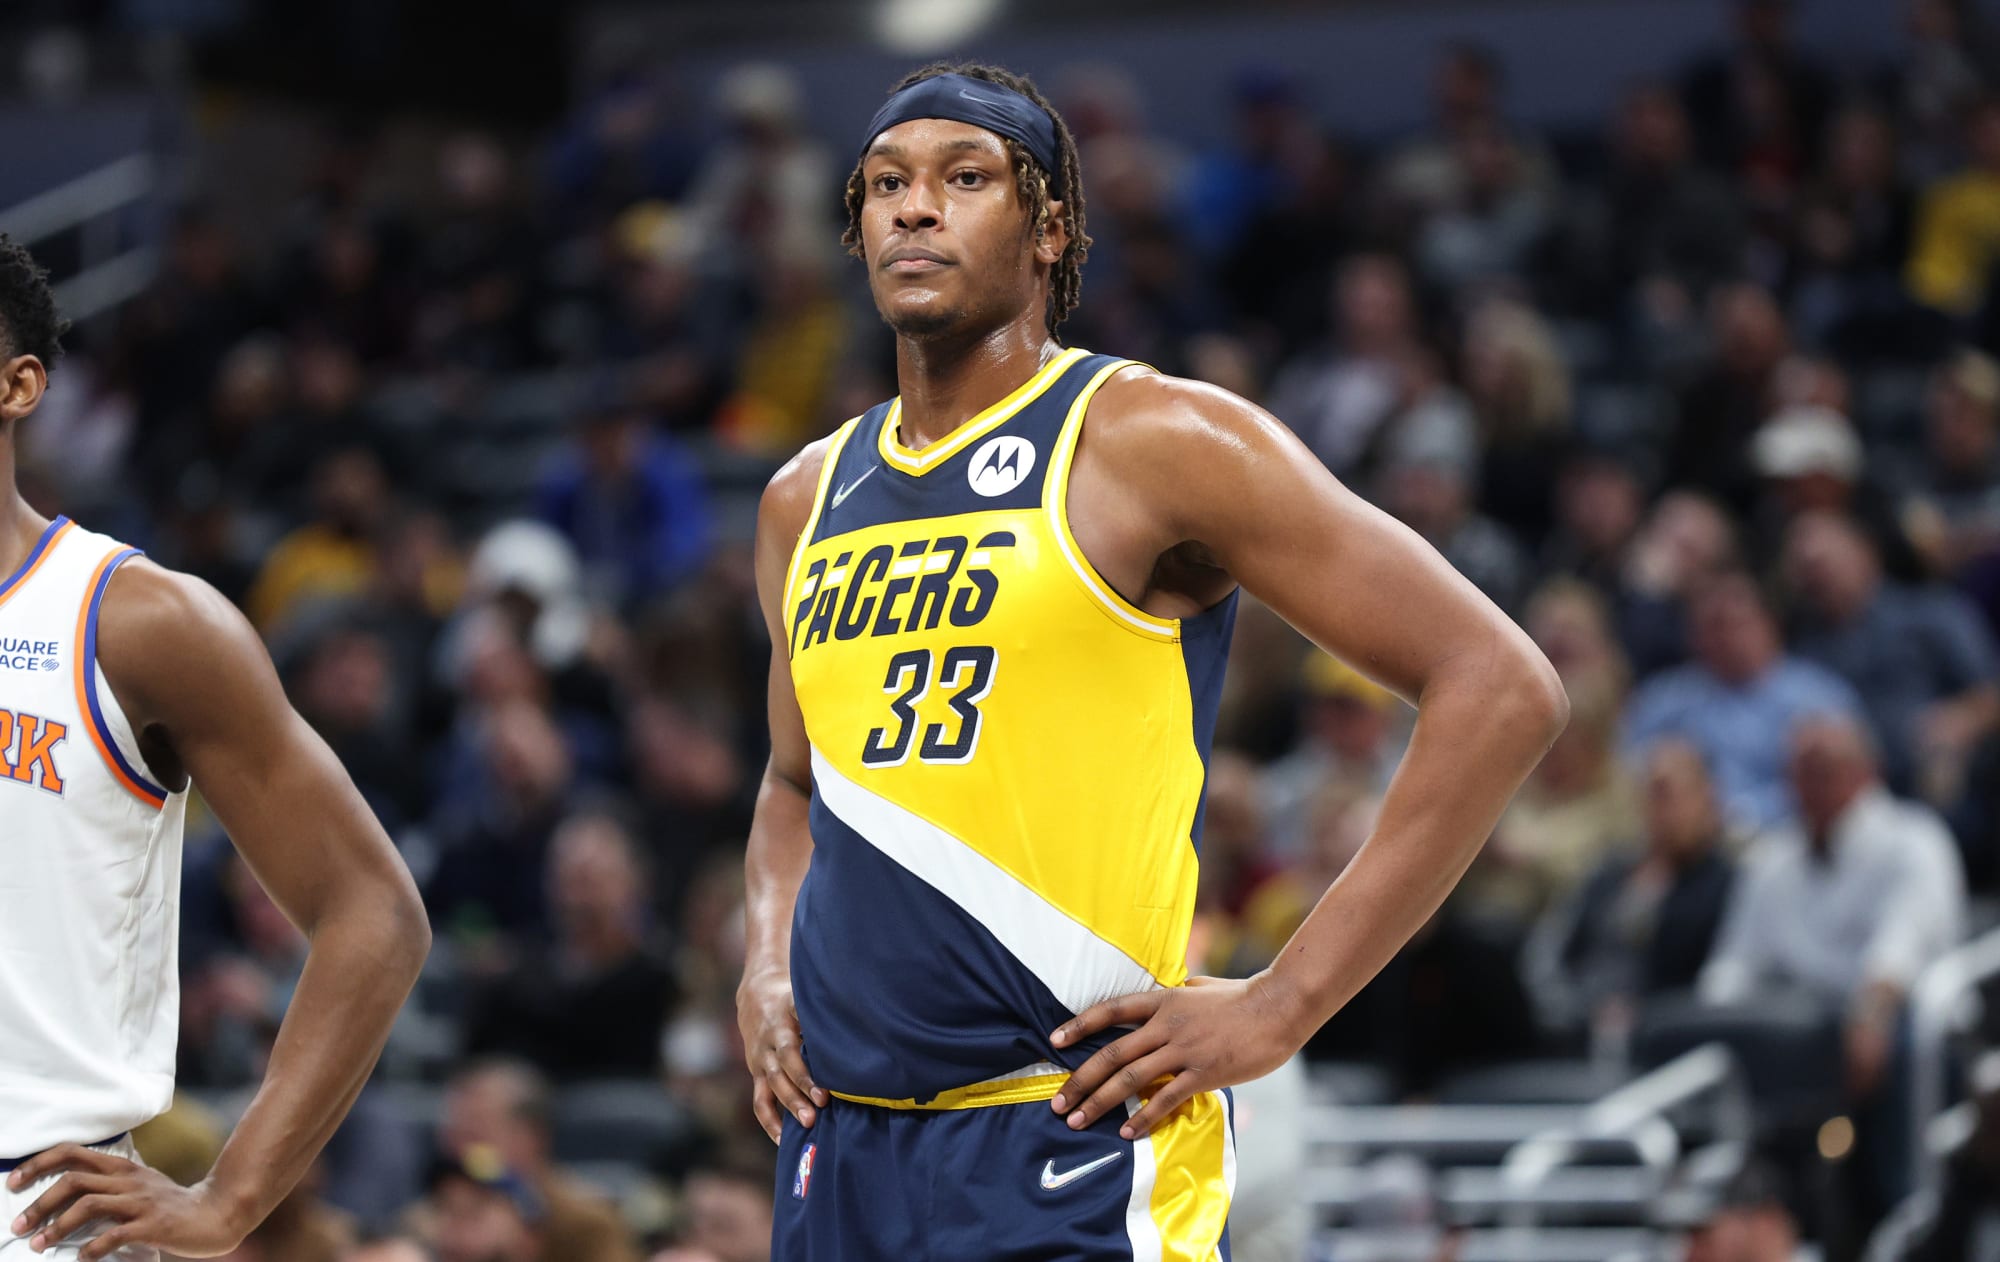 Myles Turner's NBA path inspired by childhood friend's cancer bout